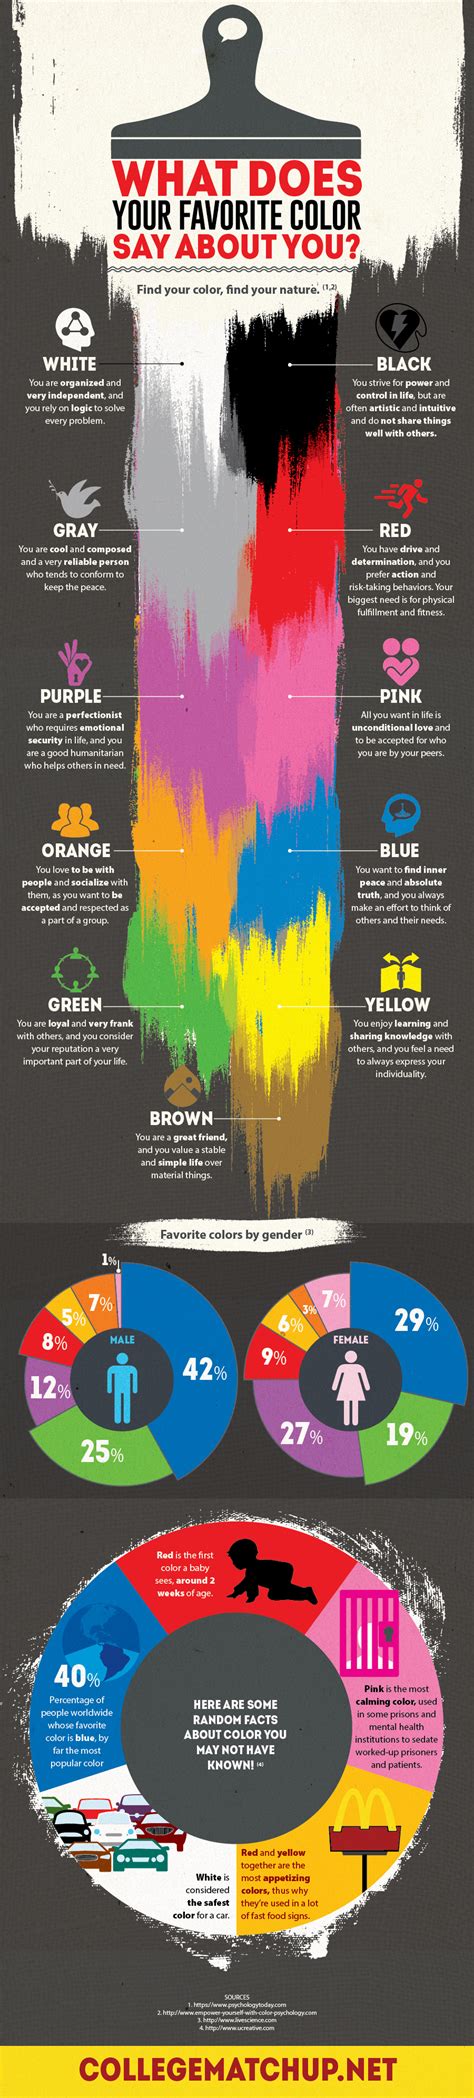 What Does Your Favorite Color Say About You